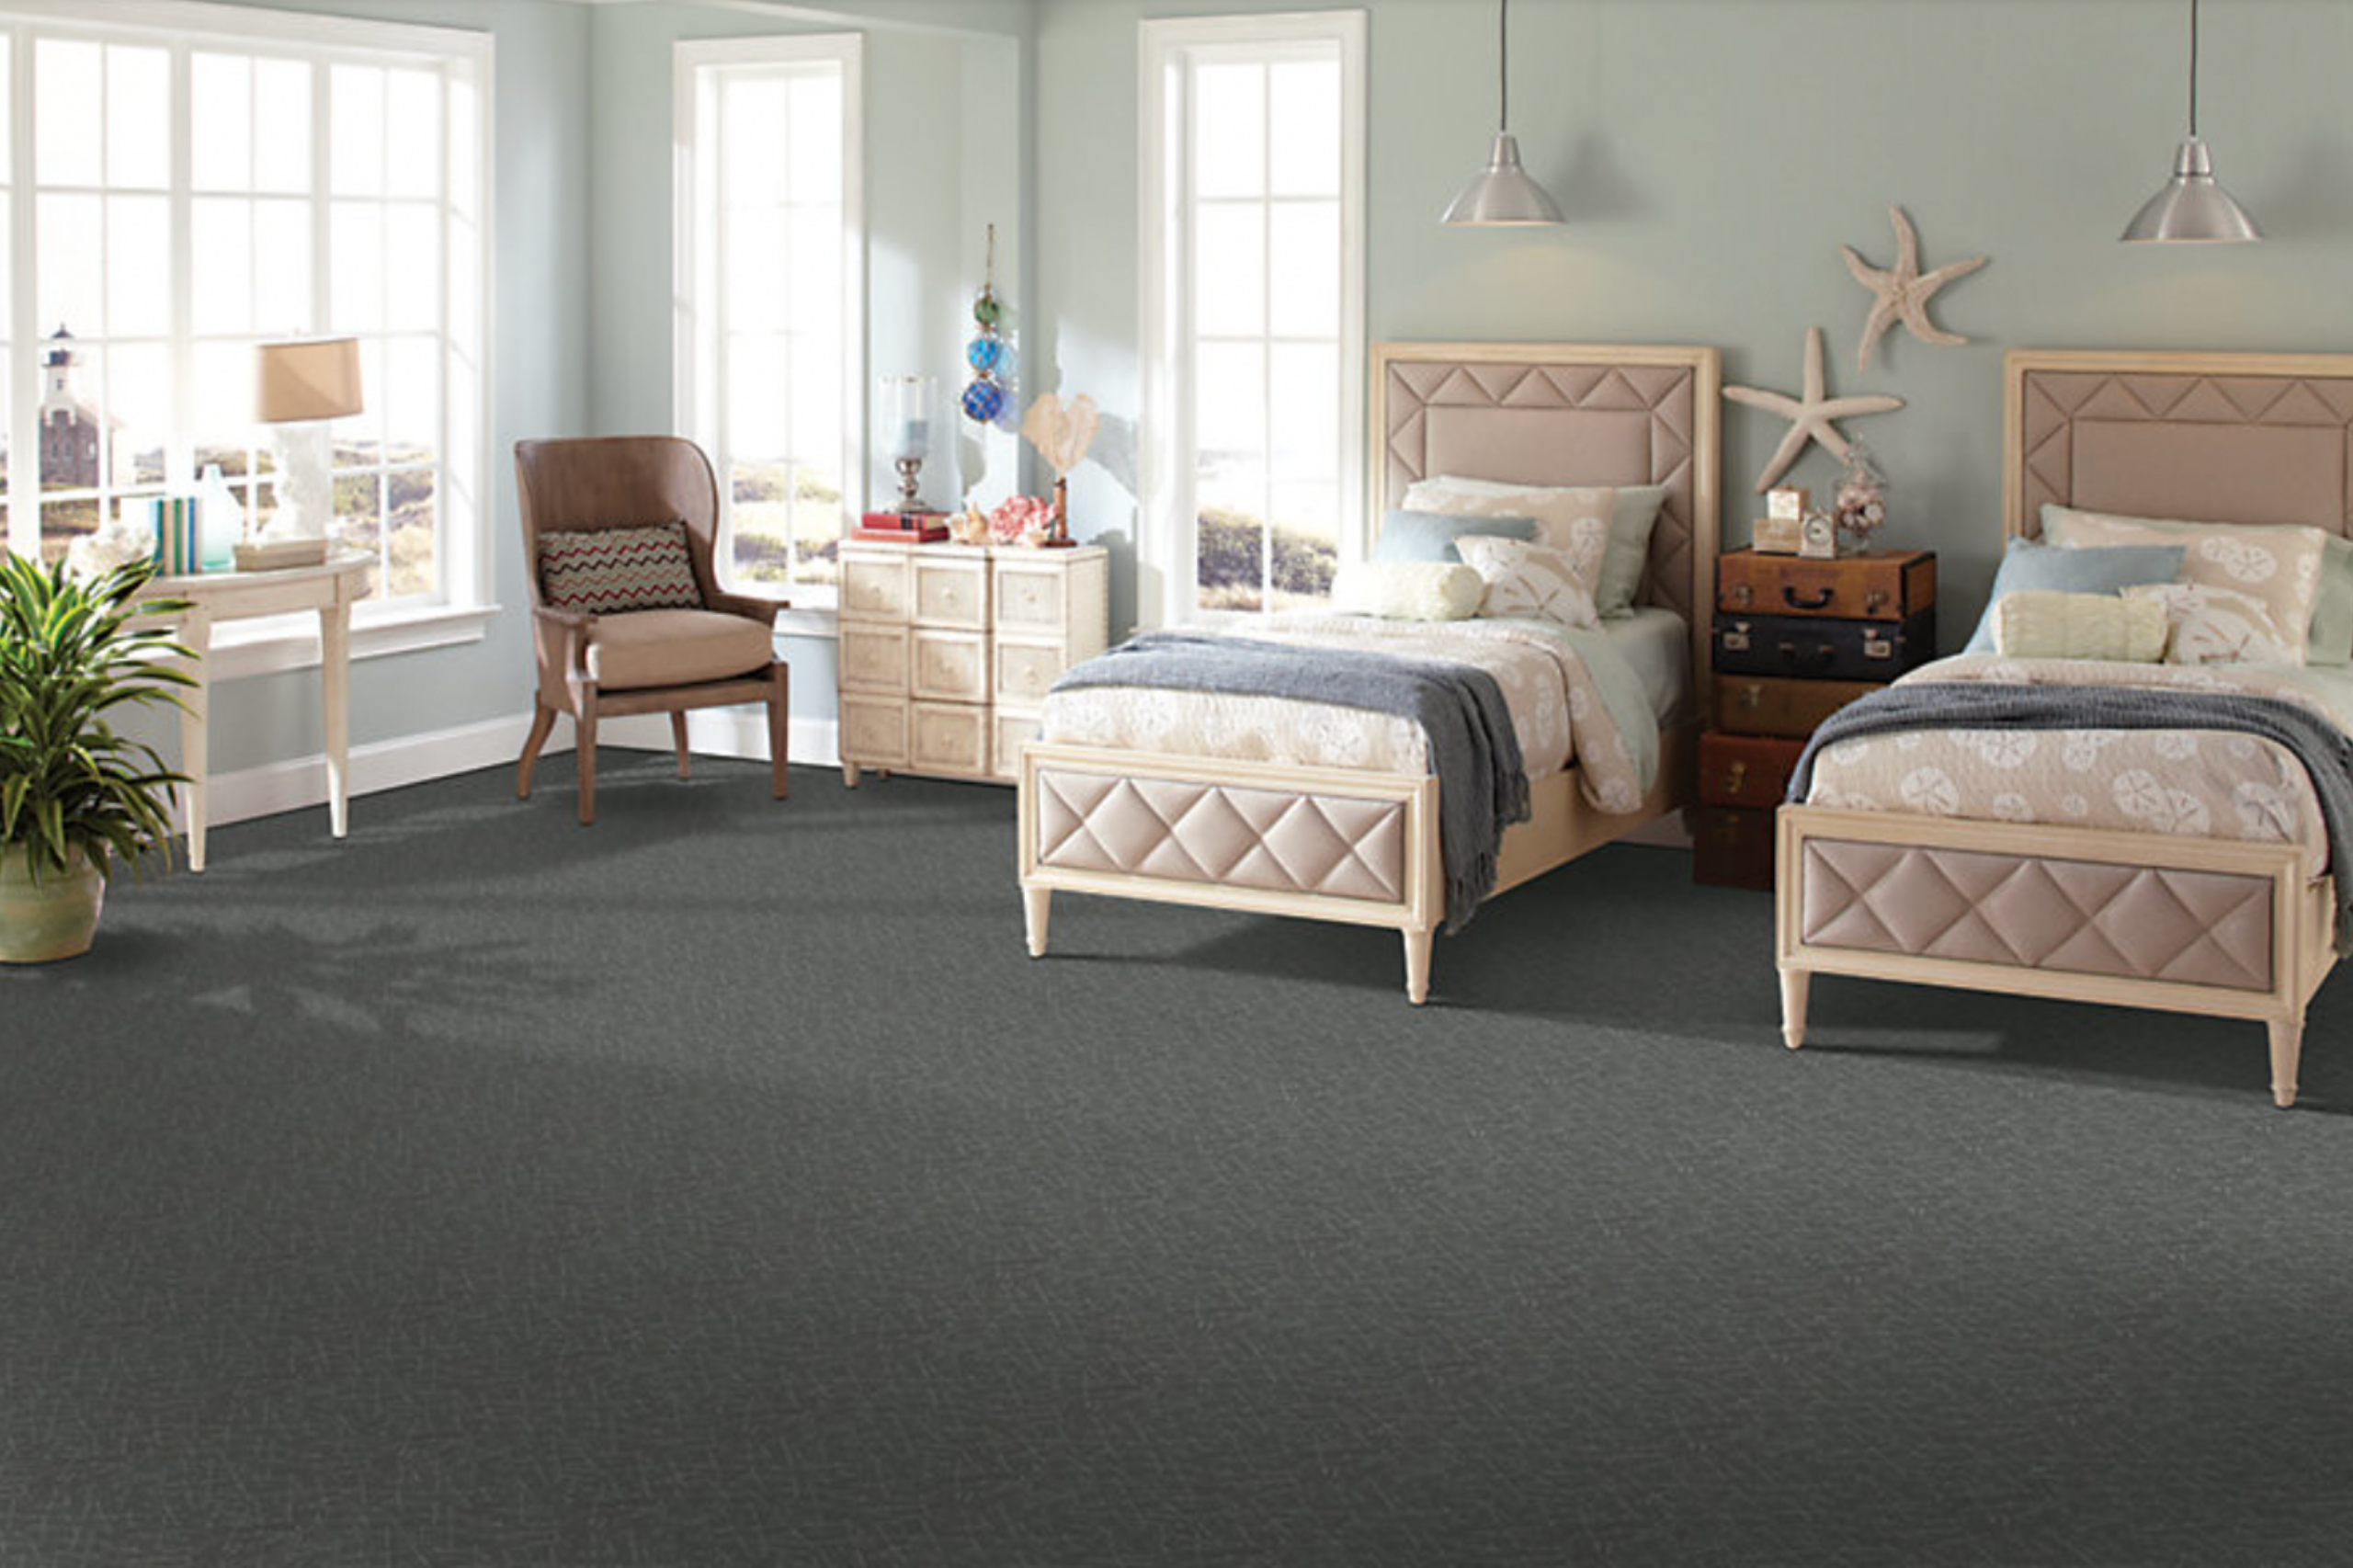 need-new-flooring-6-reasons-to-select-carpet-for-your-next-project